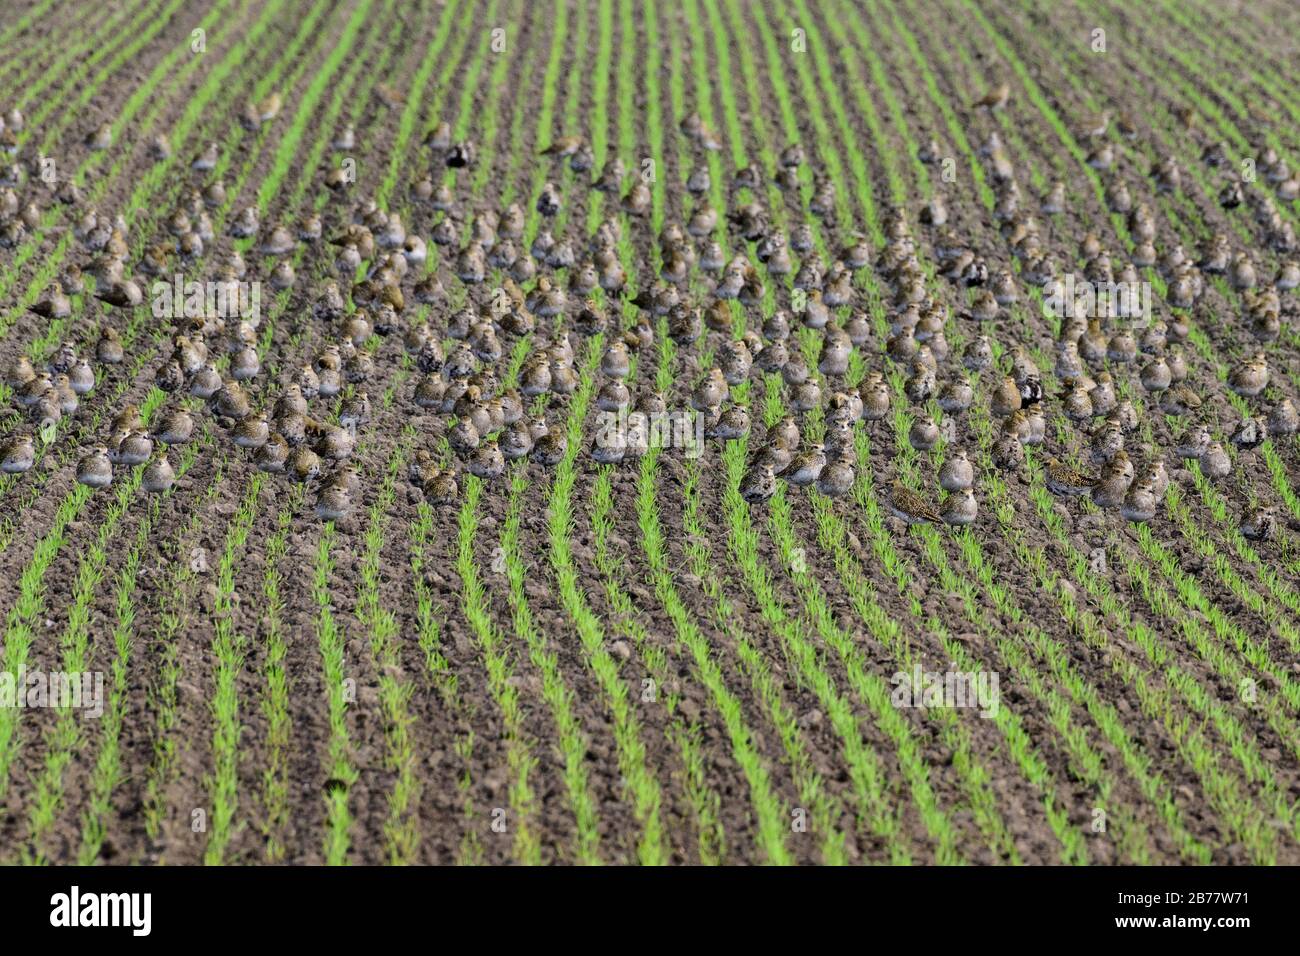 European golden plover (Pluvialis apricaria), resting swarm on a field, Bredstedt, Schleswig-Holstein, Germany Stock Photo